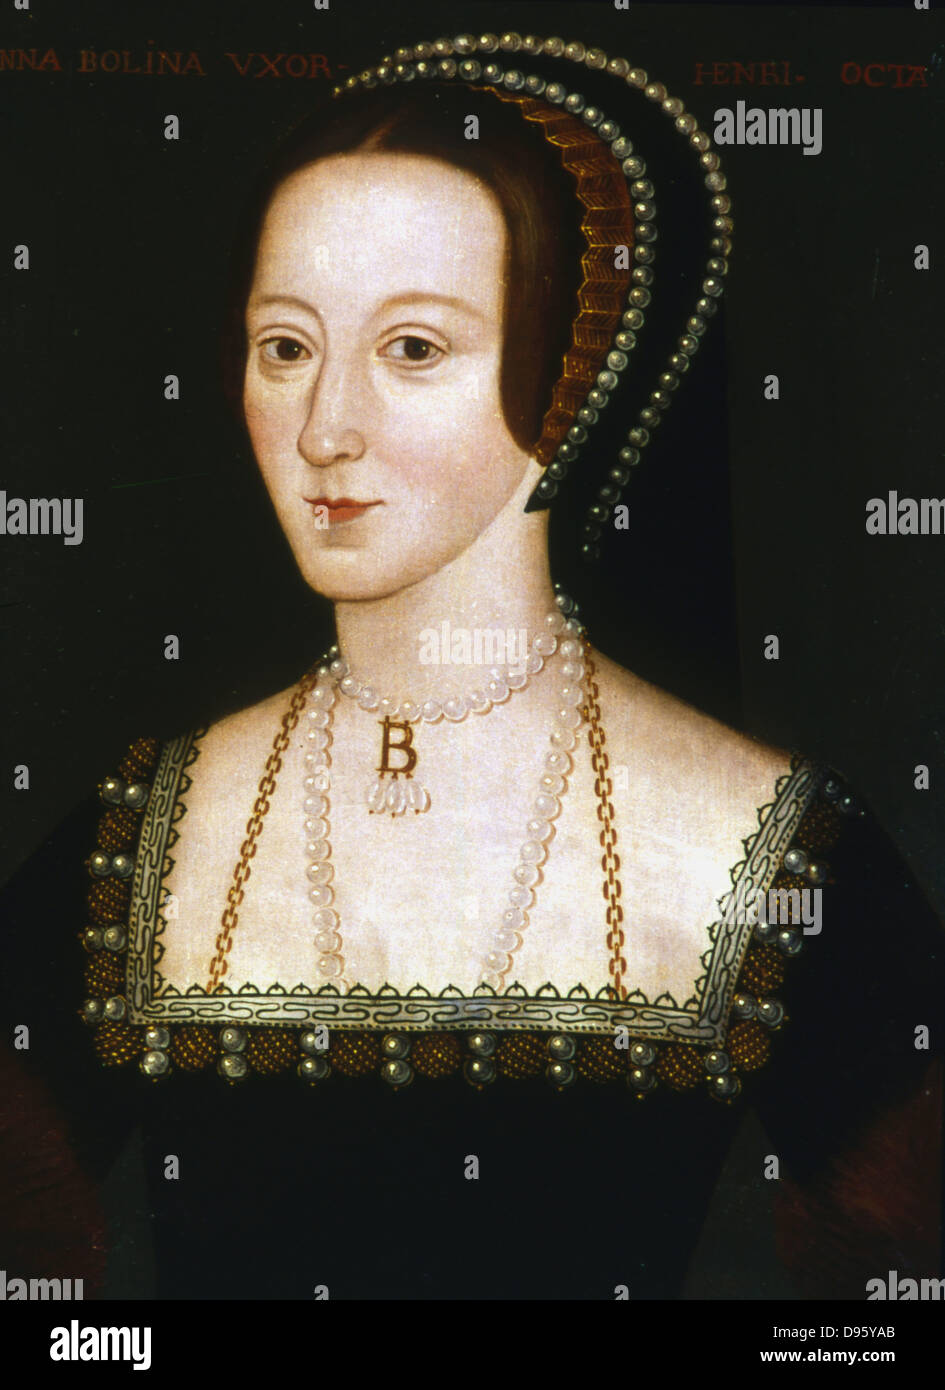 Anne Boleyn (c1504-1536) second wife of Henry VIII of England, mother of Elizabeth I. Beheaded 19 May 1536. Anonymous 16th century portrait. Stock Photo